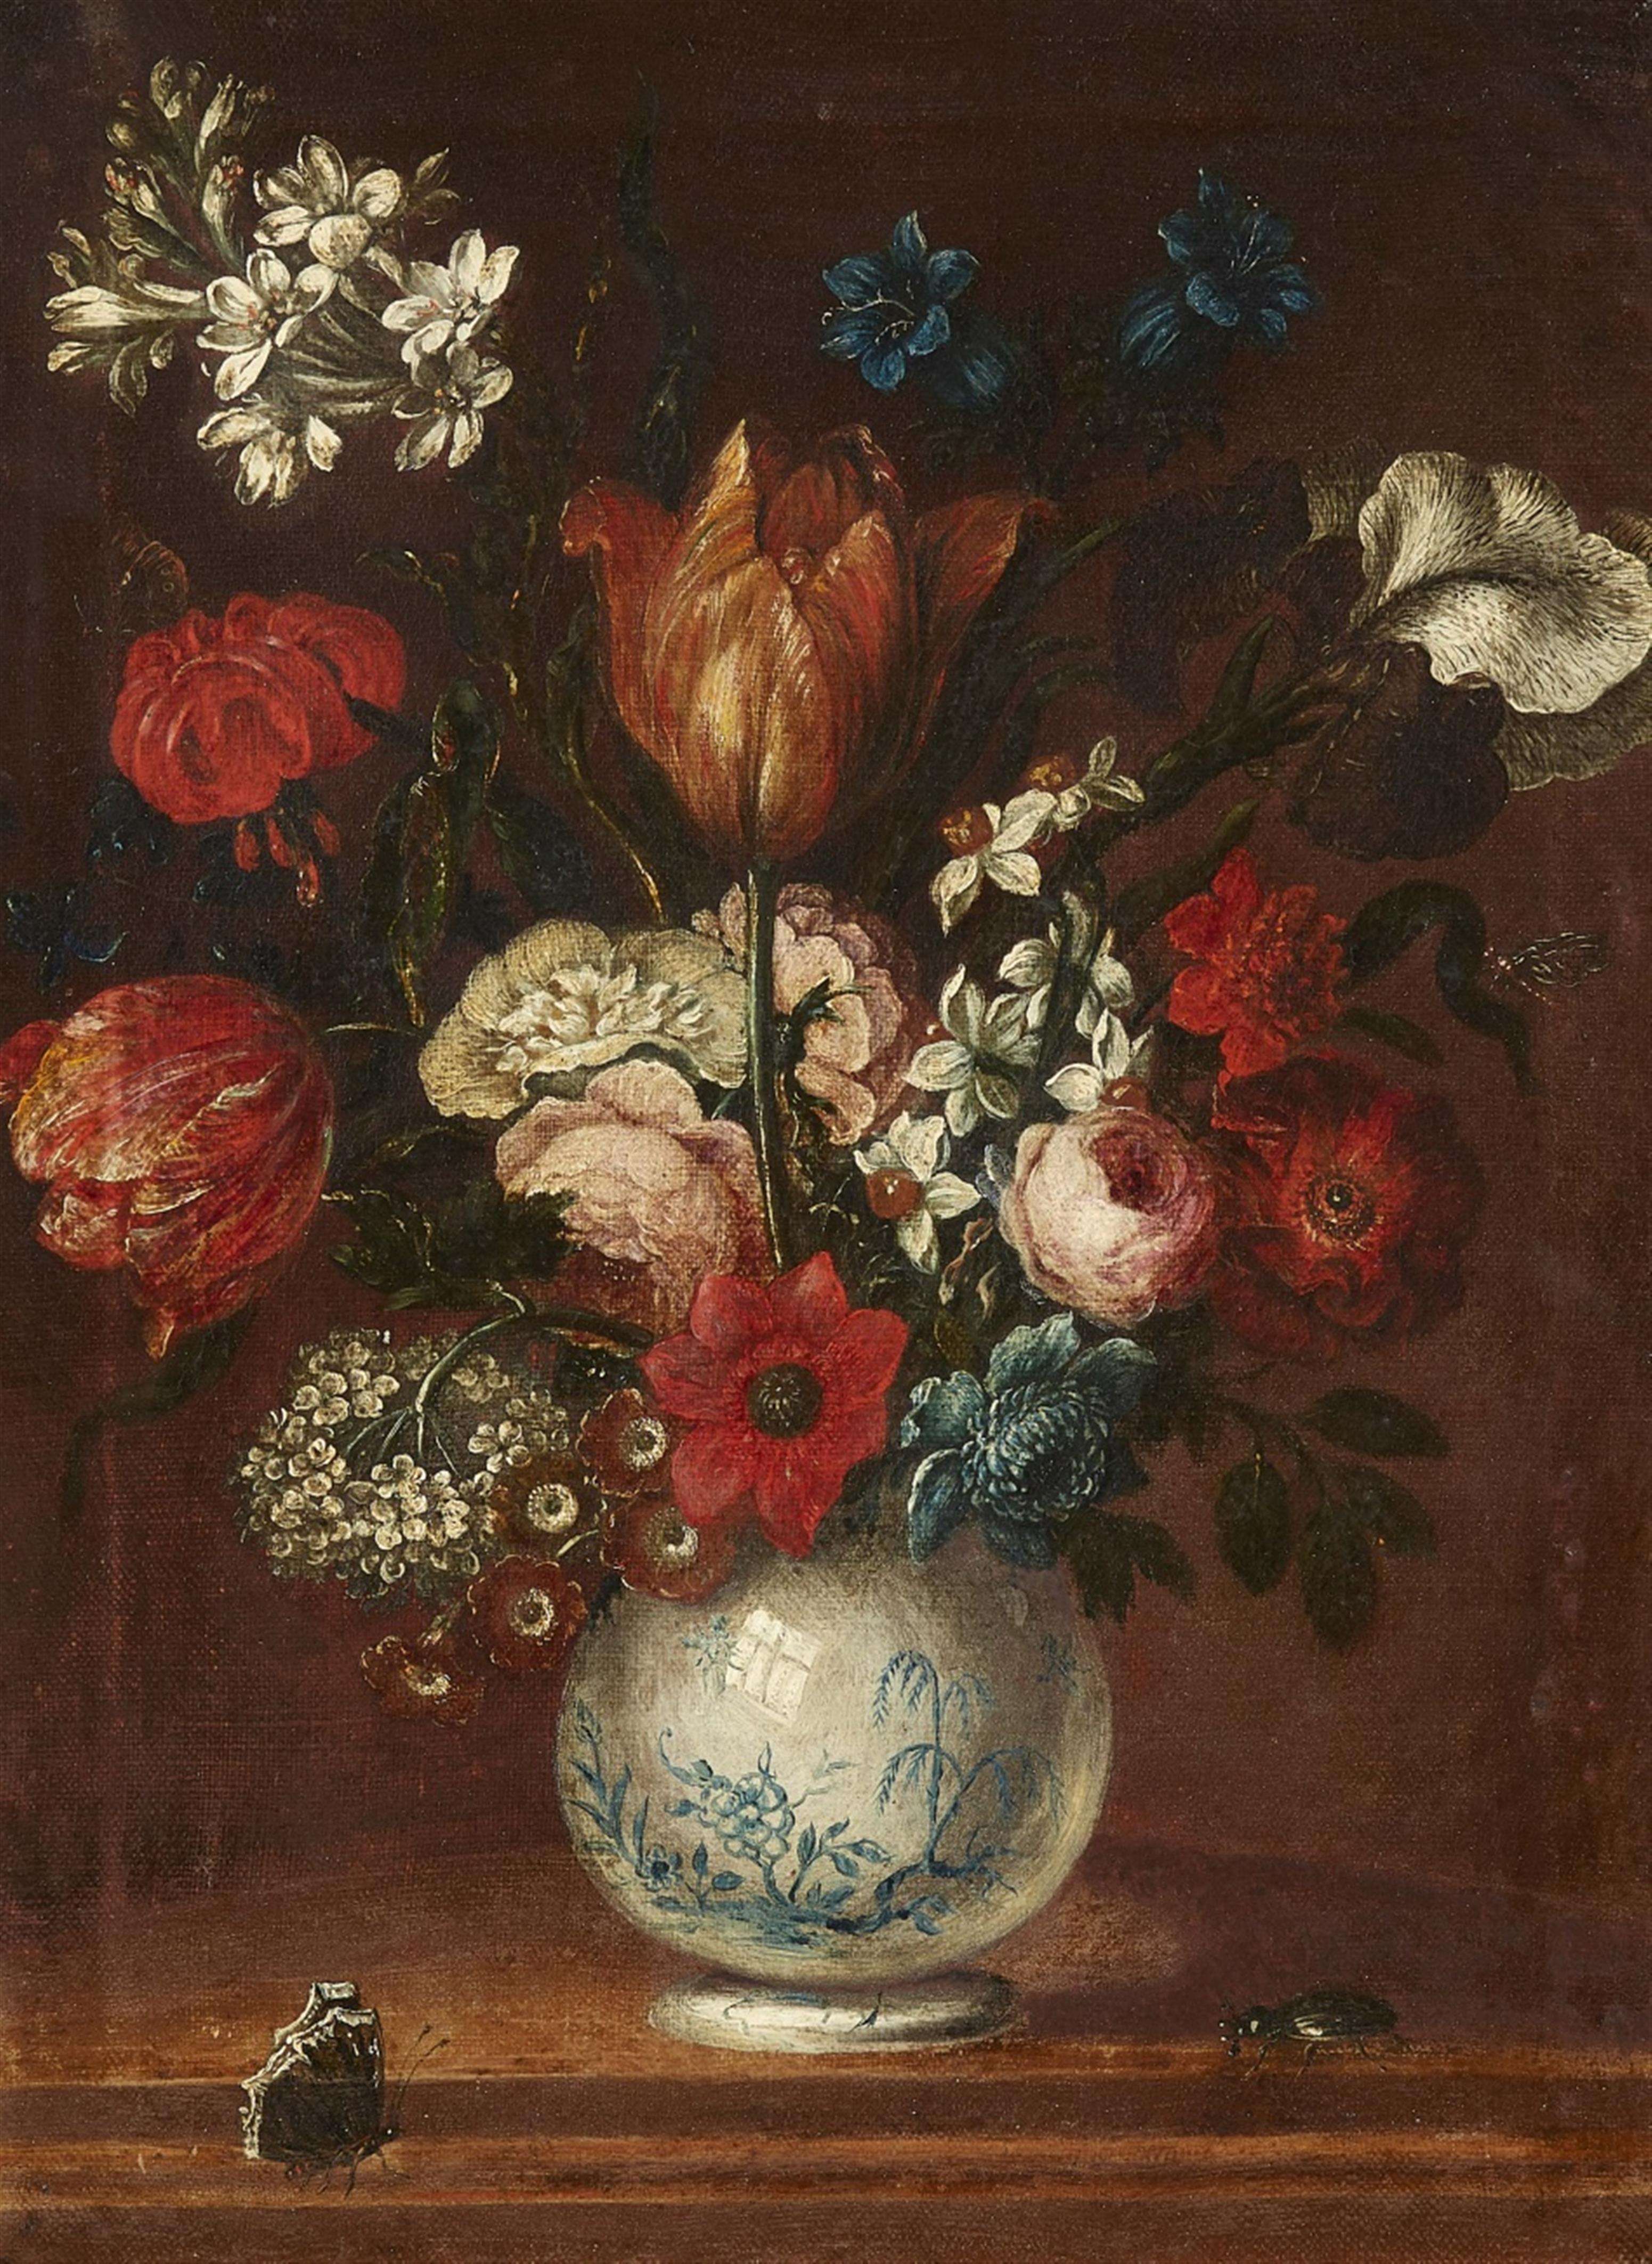 Johann Tobias Sonntag - Still Life with Flowers in a Vase, a Butterfly, and a Beetle - image-1